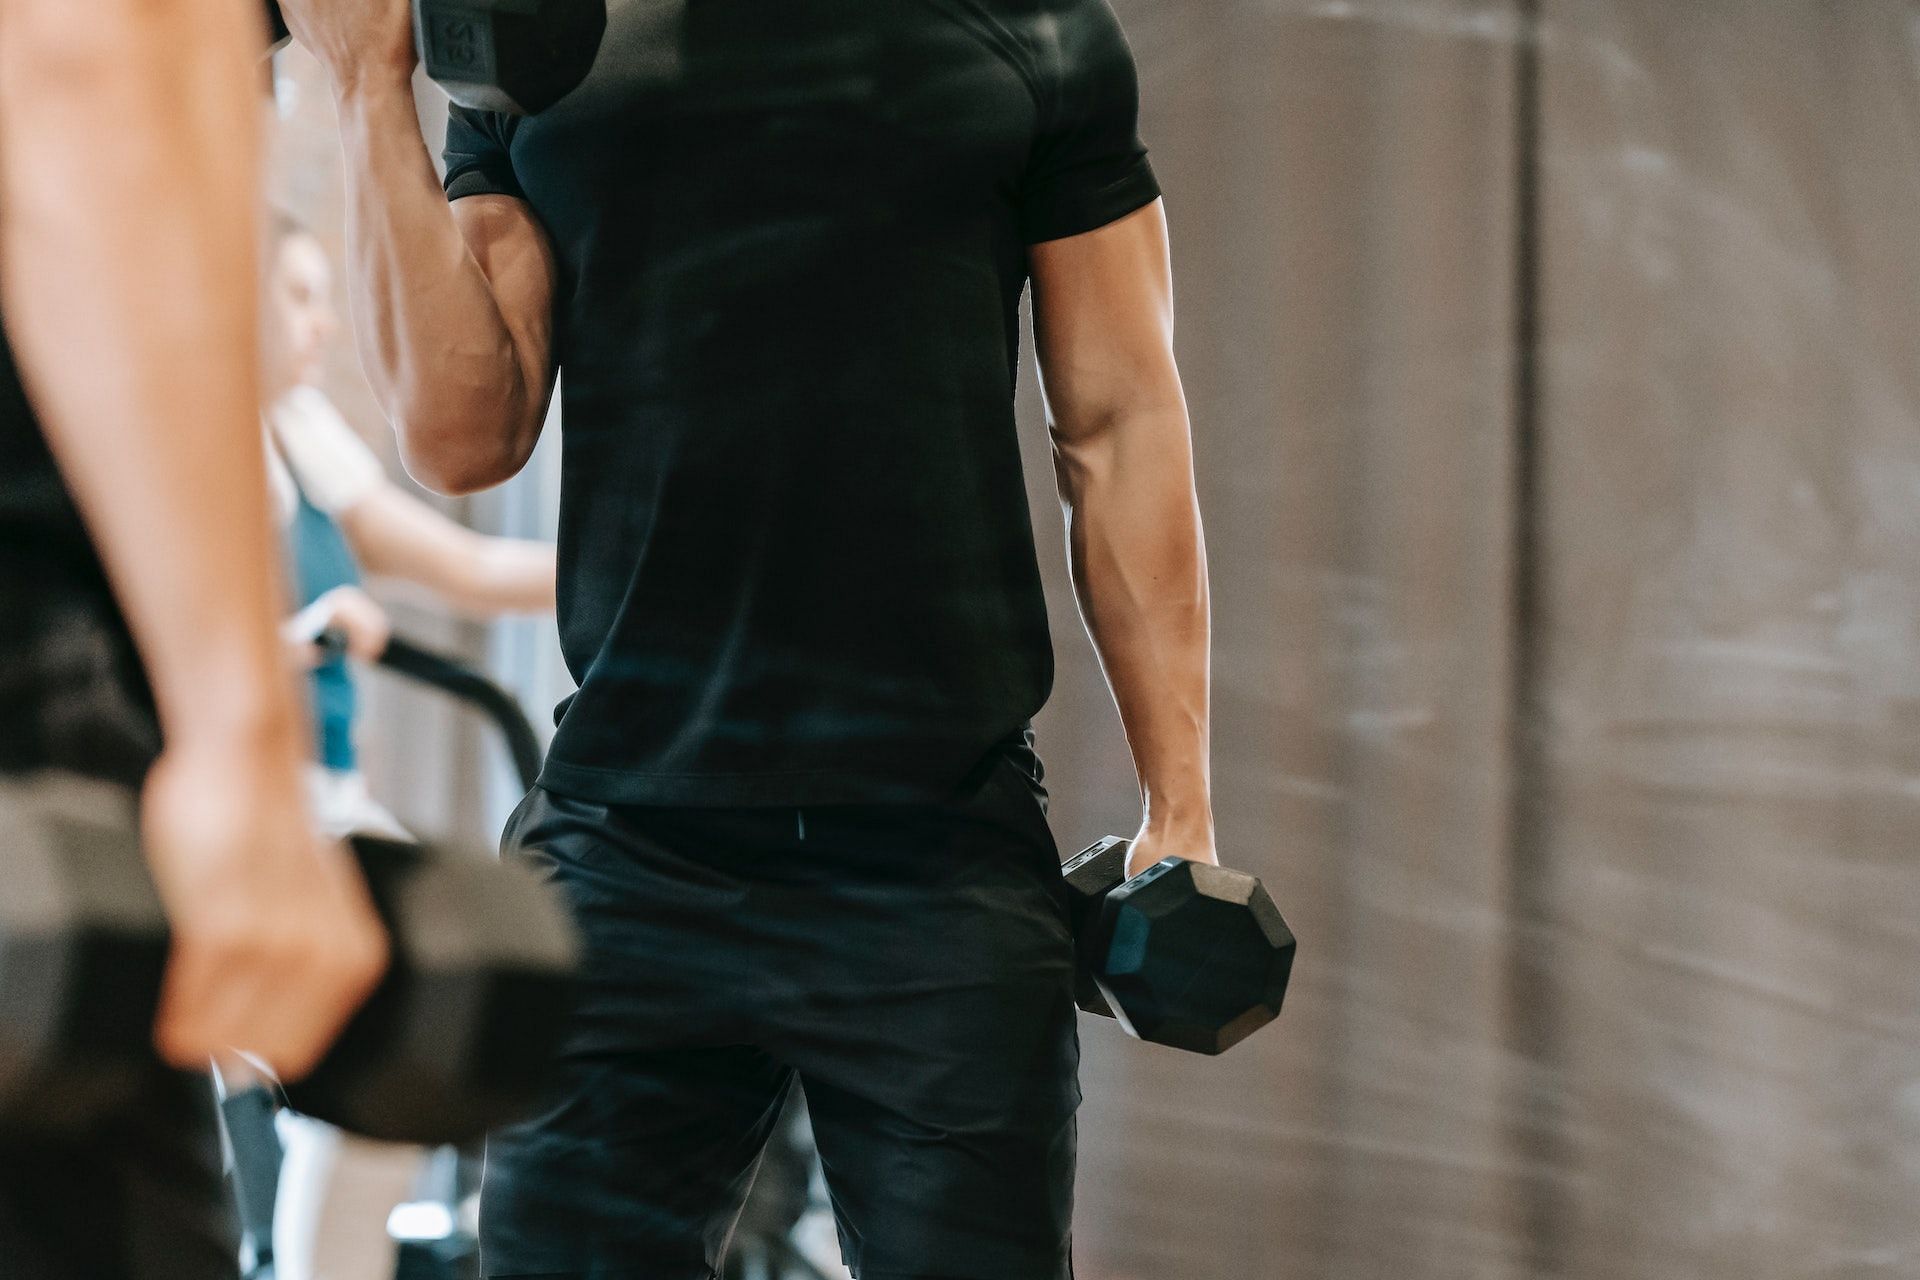 Dumbbell exercises build muscles. (Photo via Pexels/Andres Ayrton)